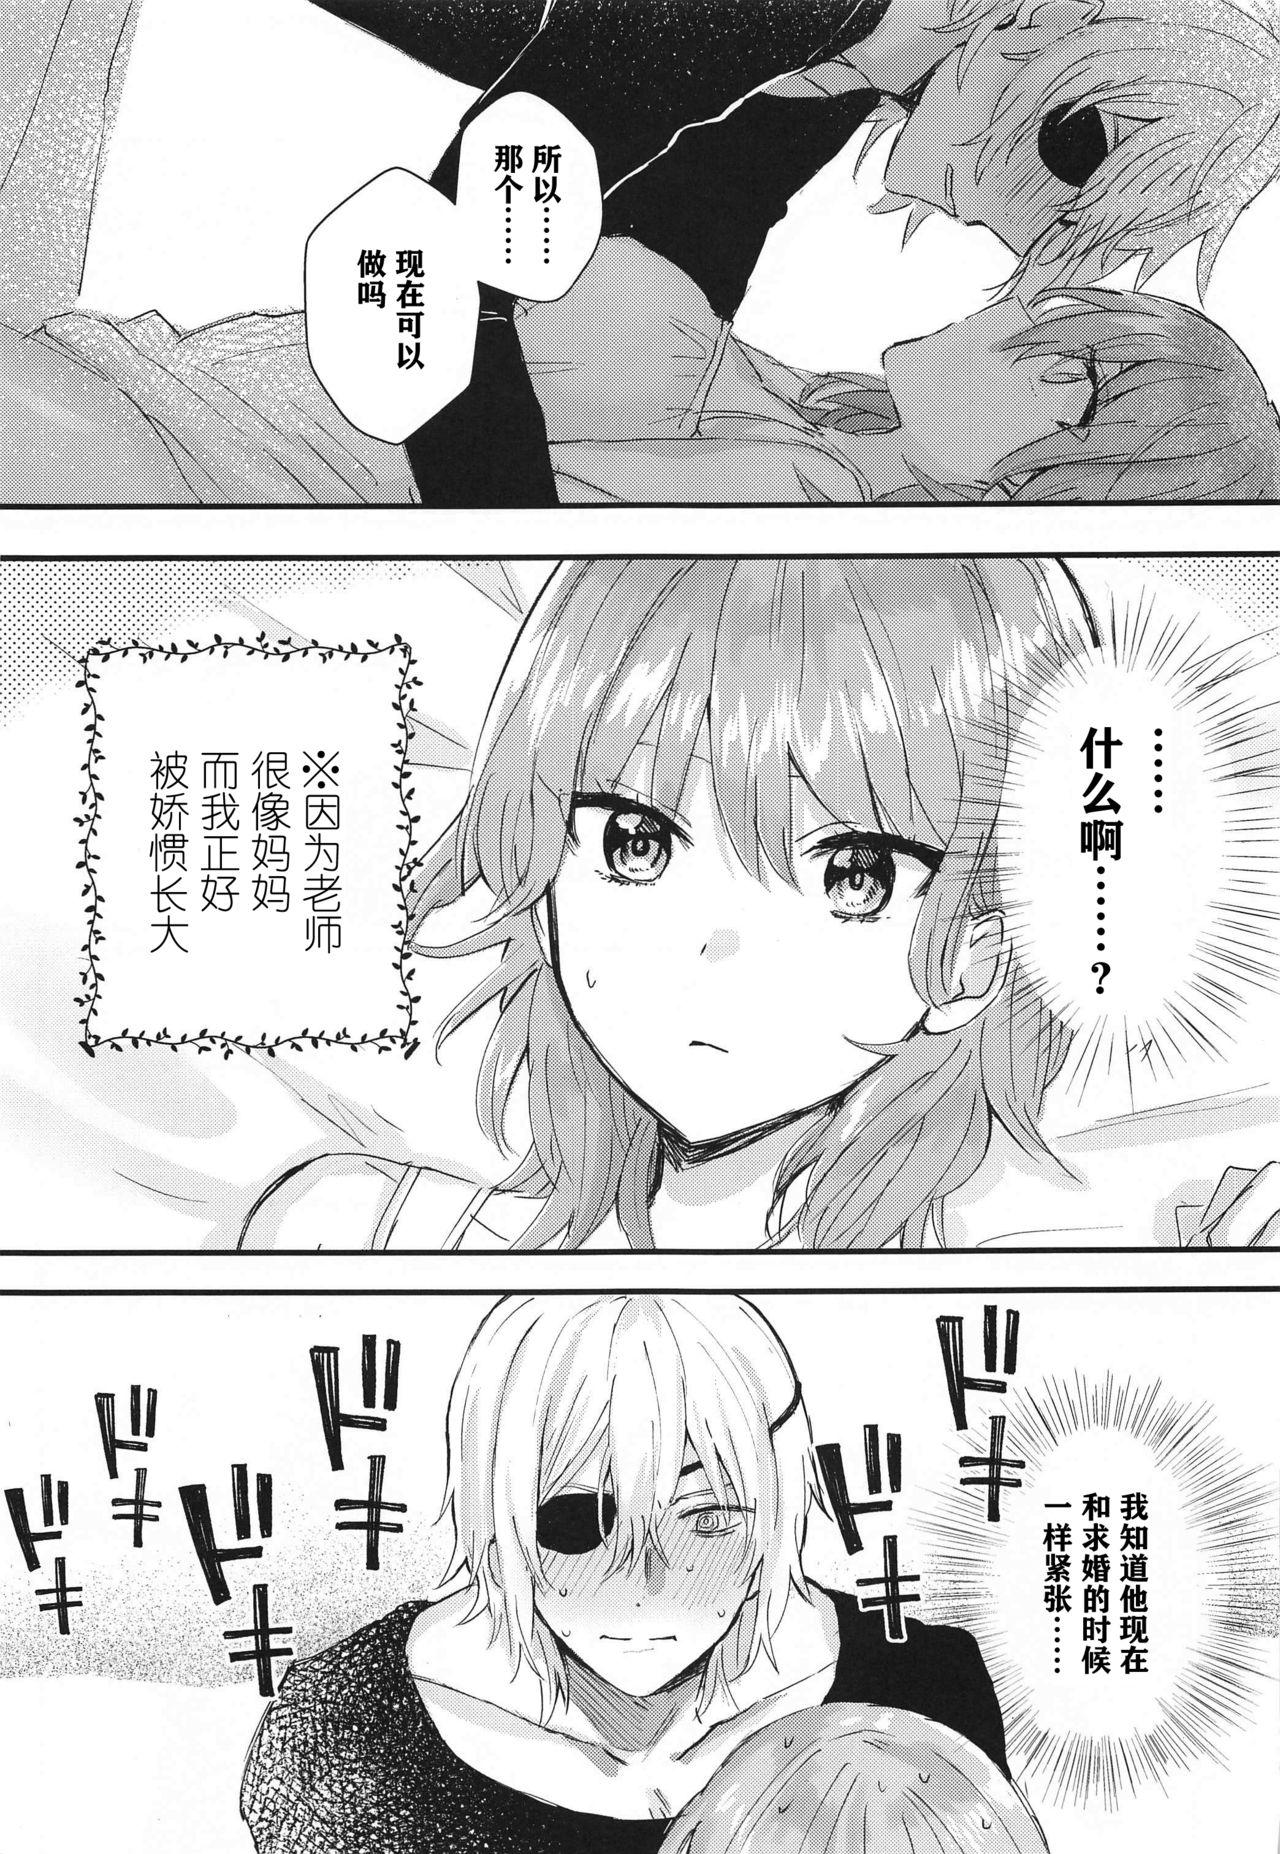 Animation Sensei no Hatena - What the professor doesn't know - Fire emblem three houses Lesbiansex - Page 5